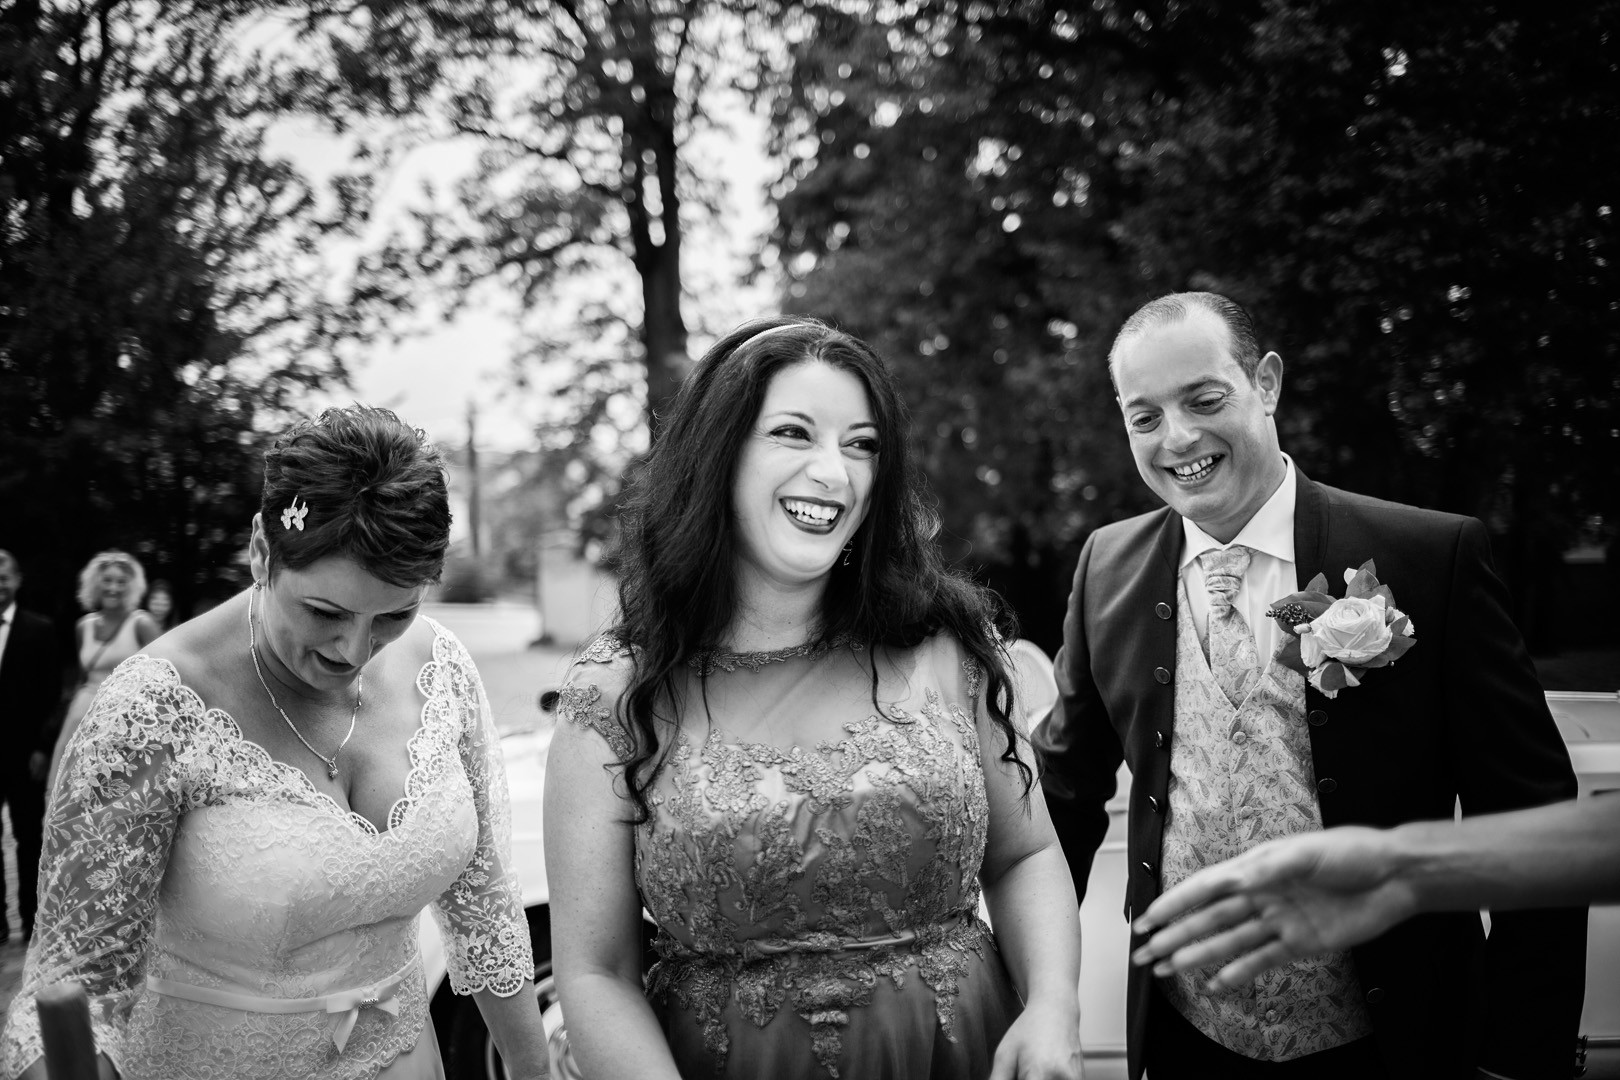 Wedding photos from the Slovak-Italian wedding of Mirka and Baldy in the beautiful surroundings of the Gbeľany Manor House - 0214.jpg